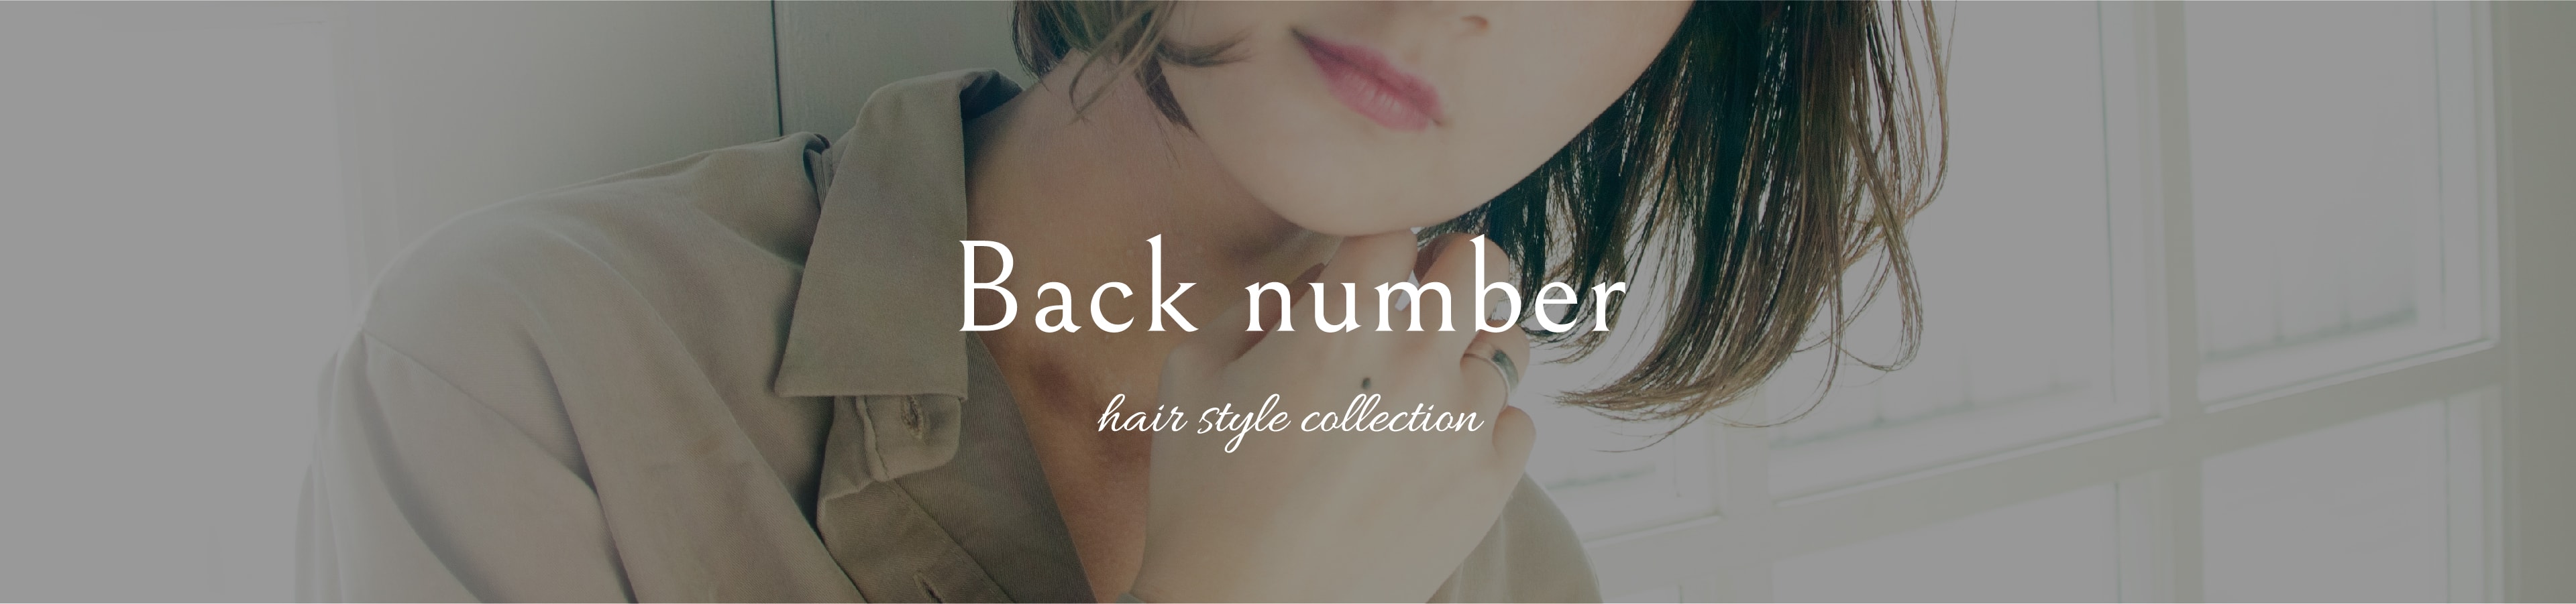 Back number hair style collection